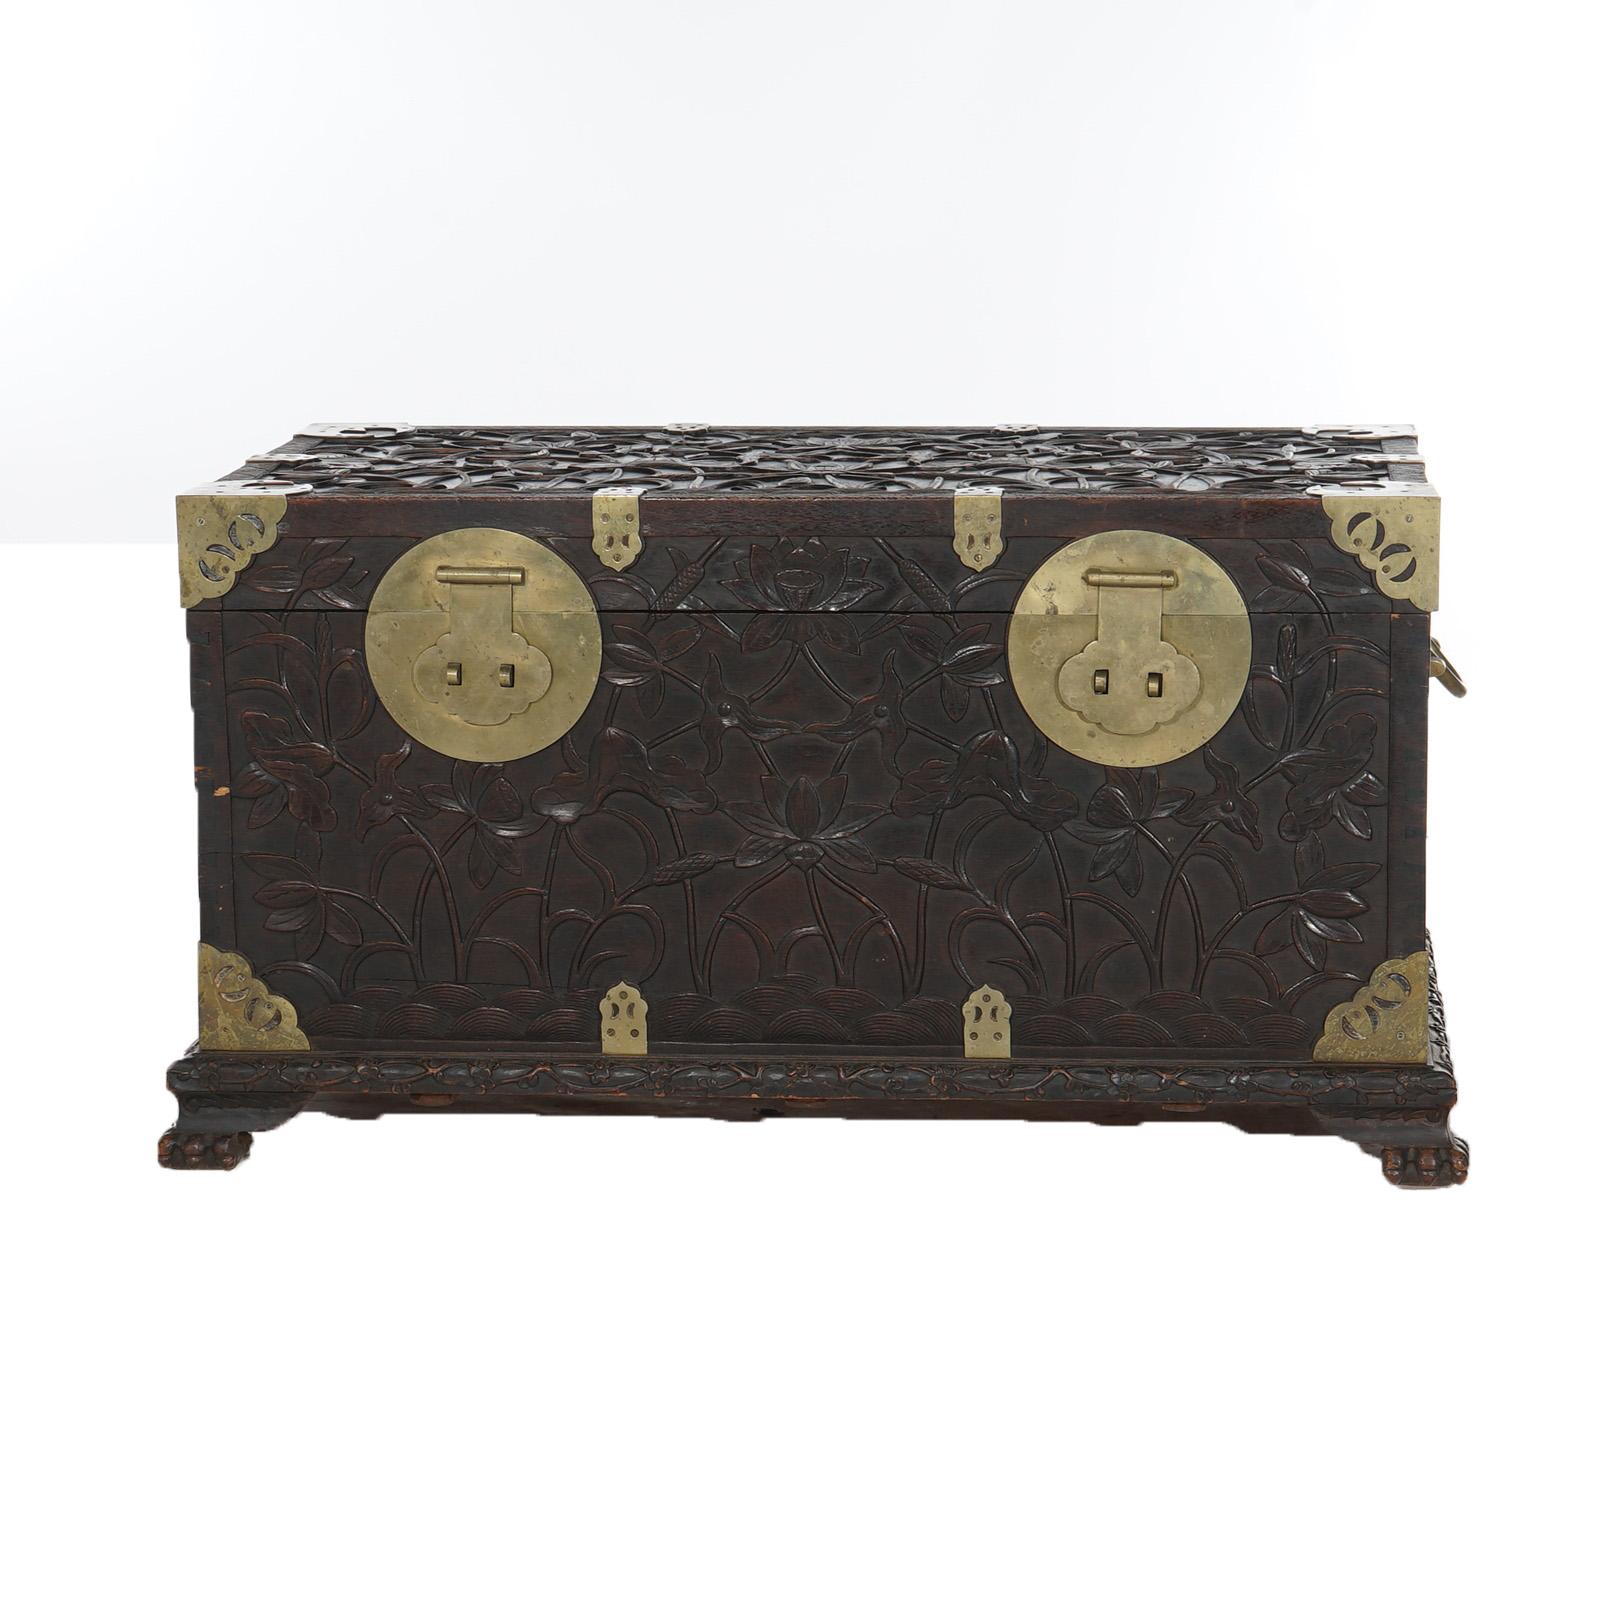 ***Ask About Reduced In-House Delivery Rates - Reliable Professional Service & Fully Insured***
Antique Chinese Blanket Wedding Chest Carved in Relief with Floral Design and Brass Hardware C1890

Measures- 24''H x 44''W x 24''D